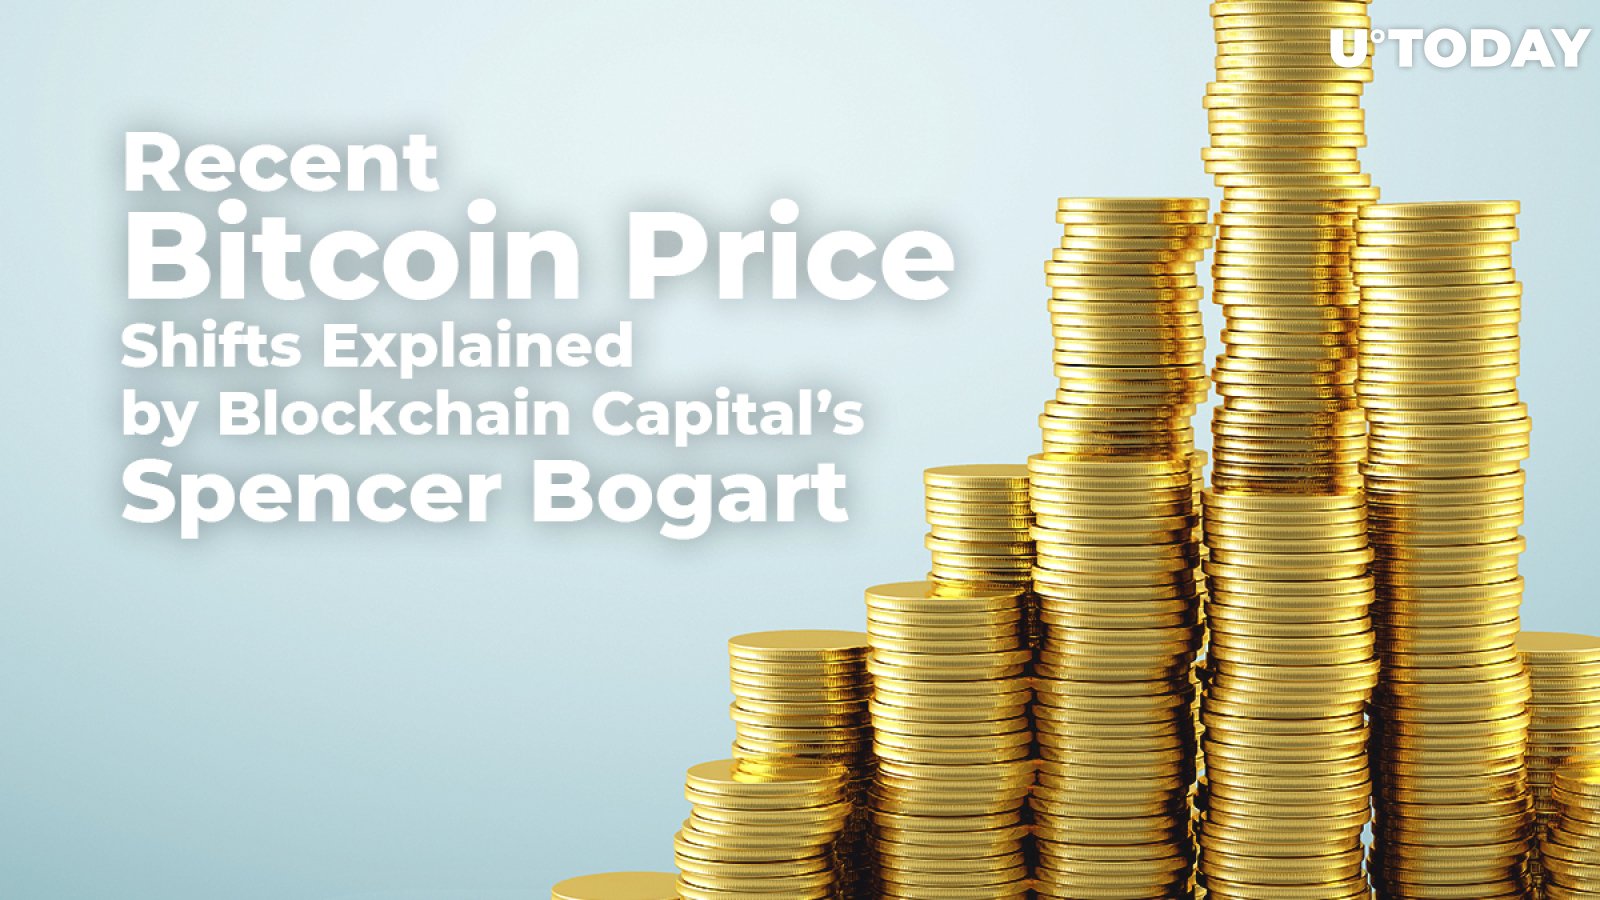 Recent Bitcoin Price Shifts Explained by Blockchain Capital’s Spencer Bogart: Bloomberg